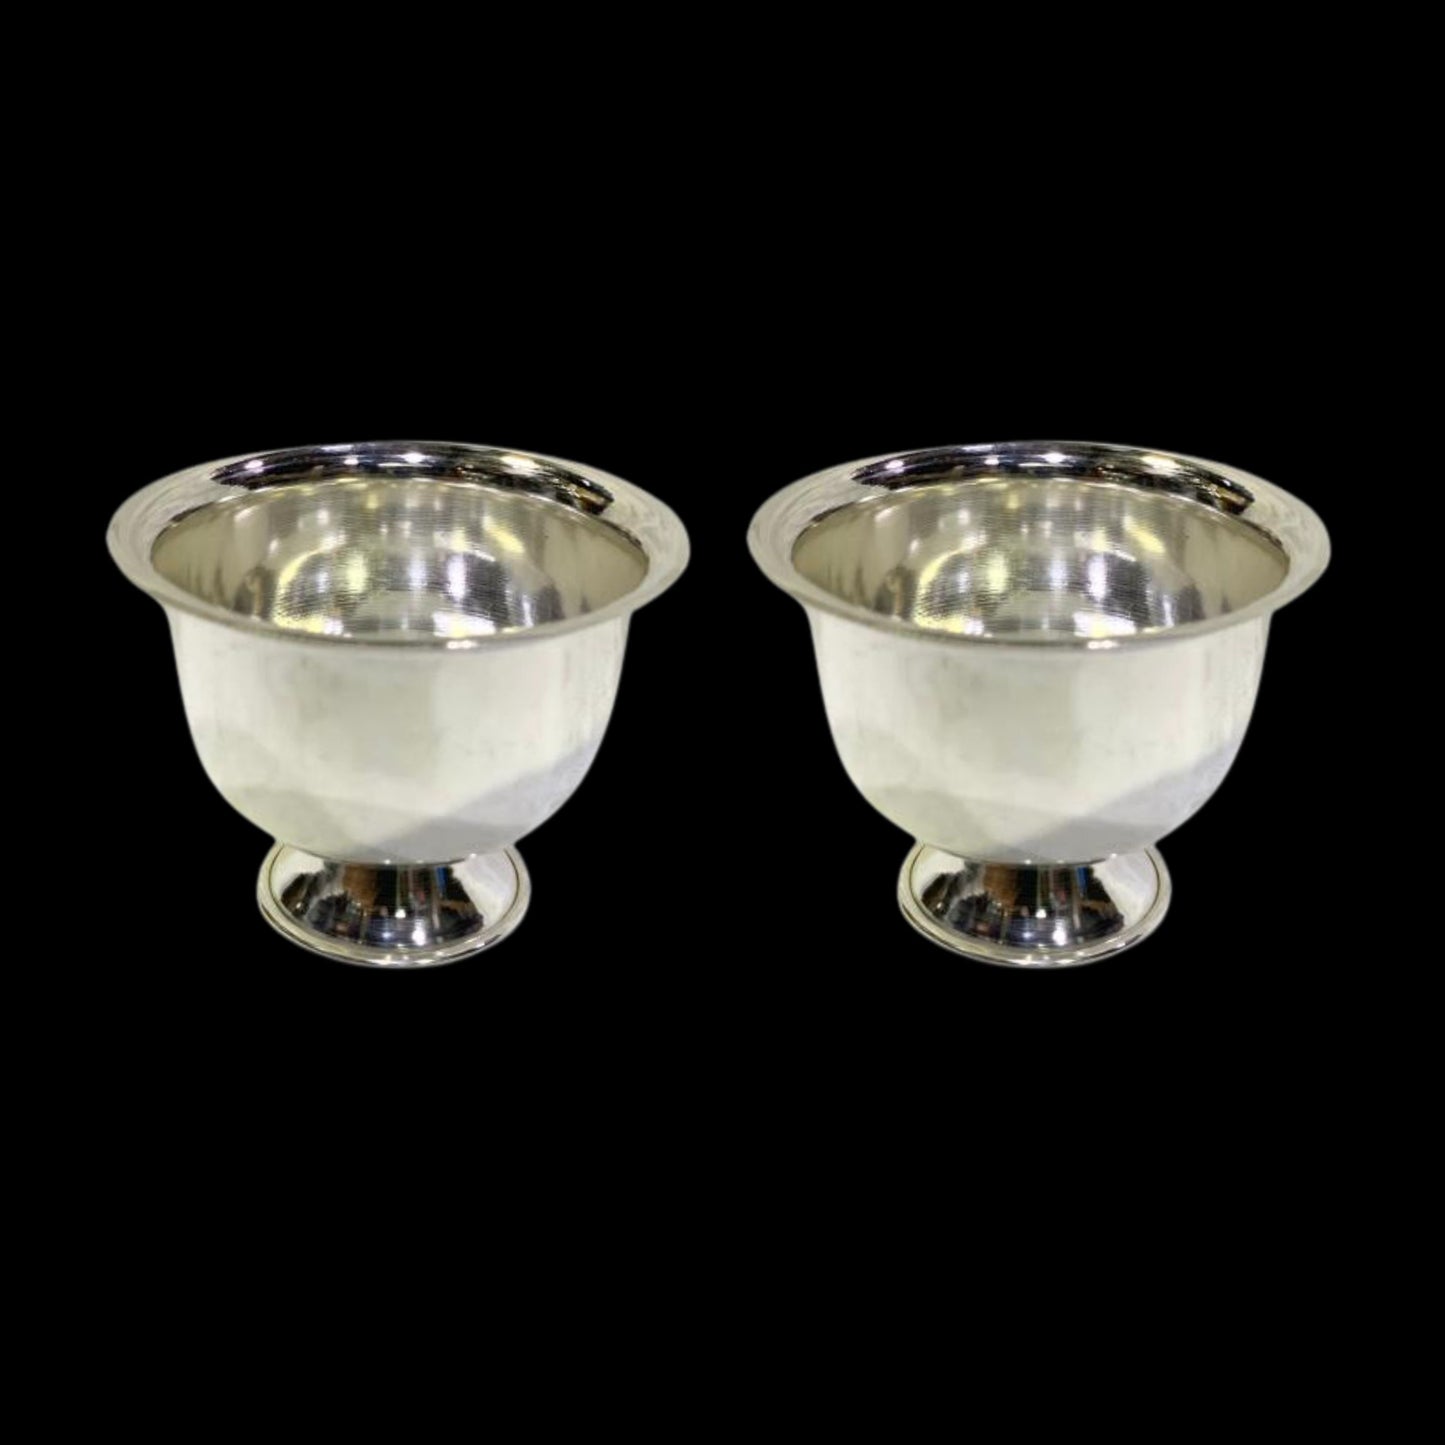 52 gms Pure Silver Padam Cups (Set Of 2) - Mirror Finished BIS Hallmarked